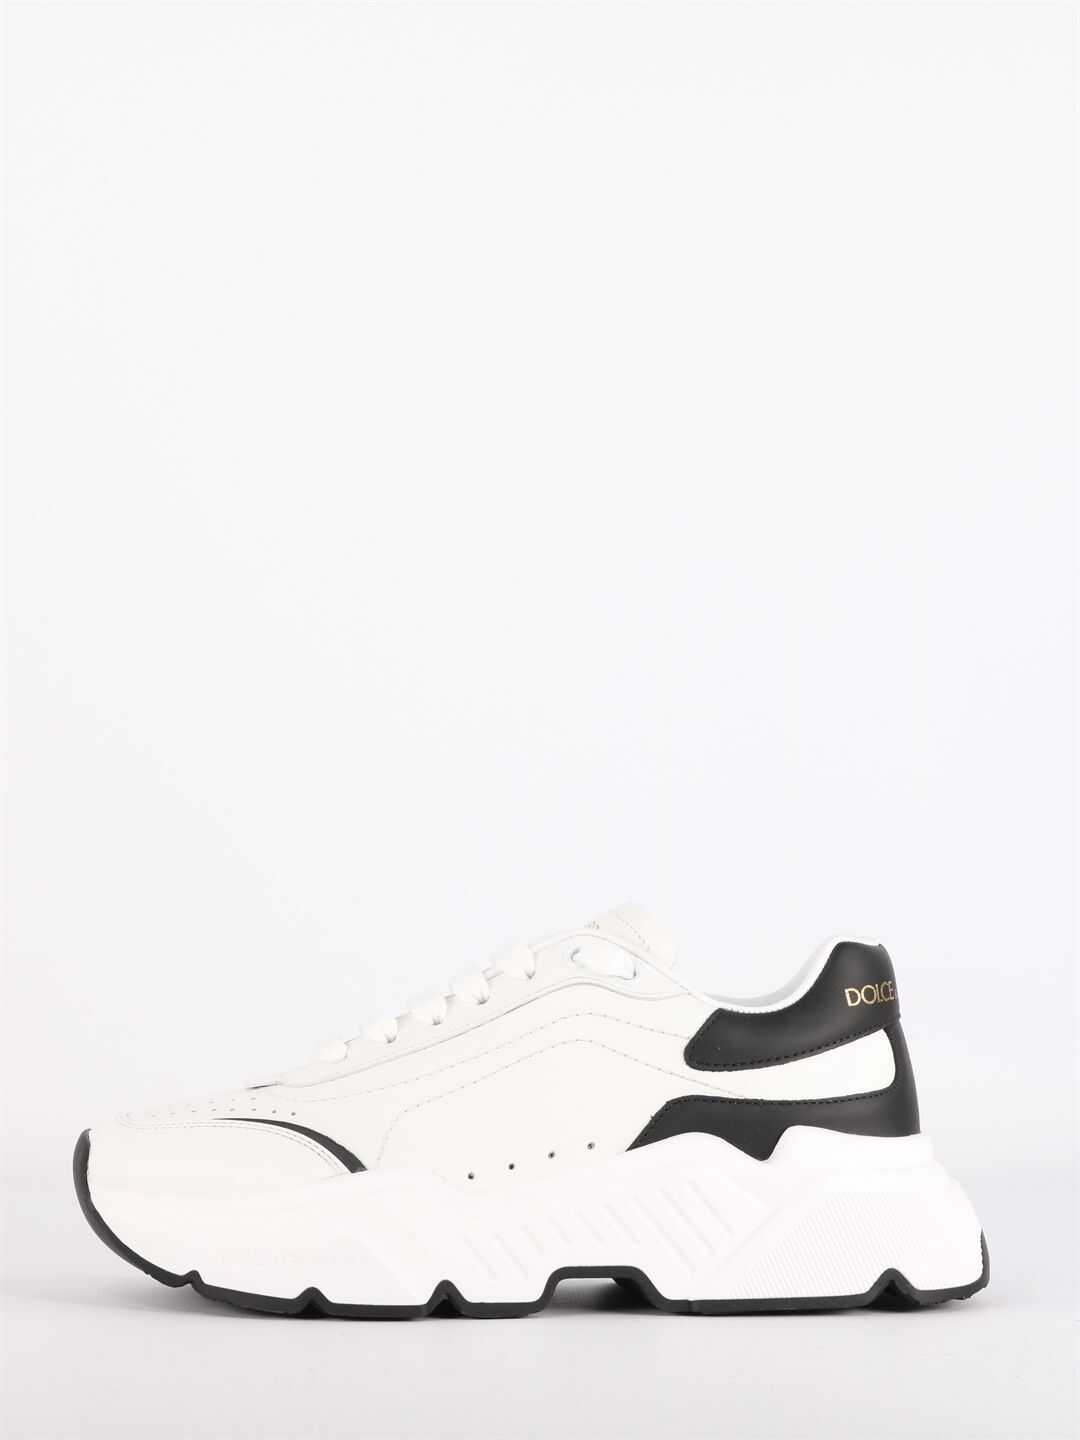 Dolce & Gabbana Daymaster Sneakers CK1791 AX589 White